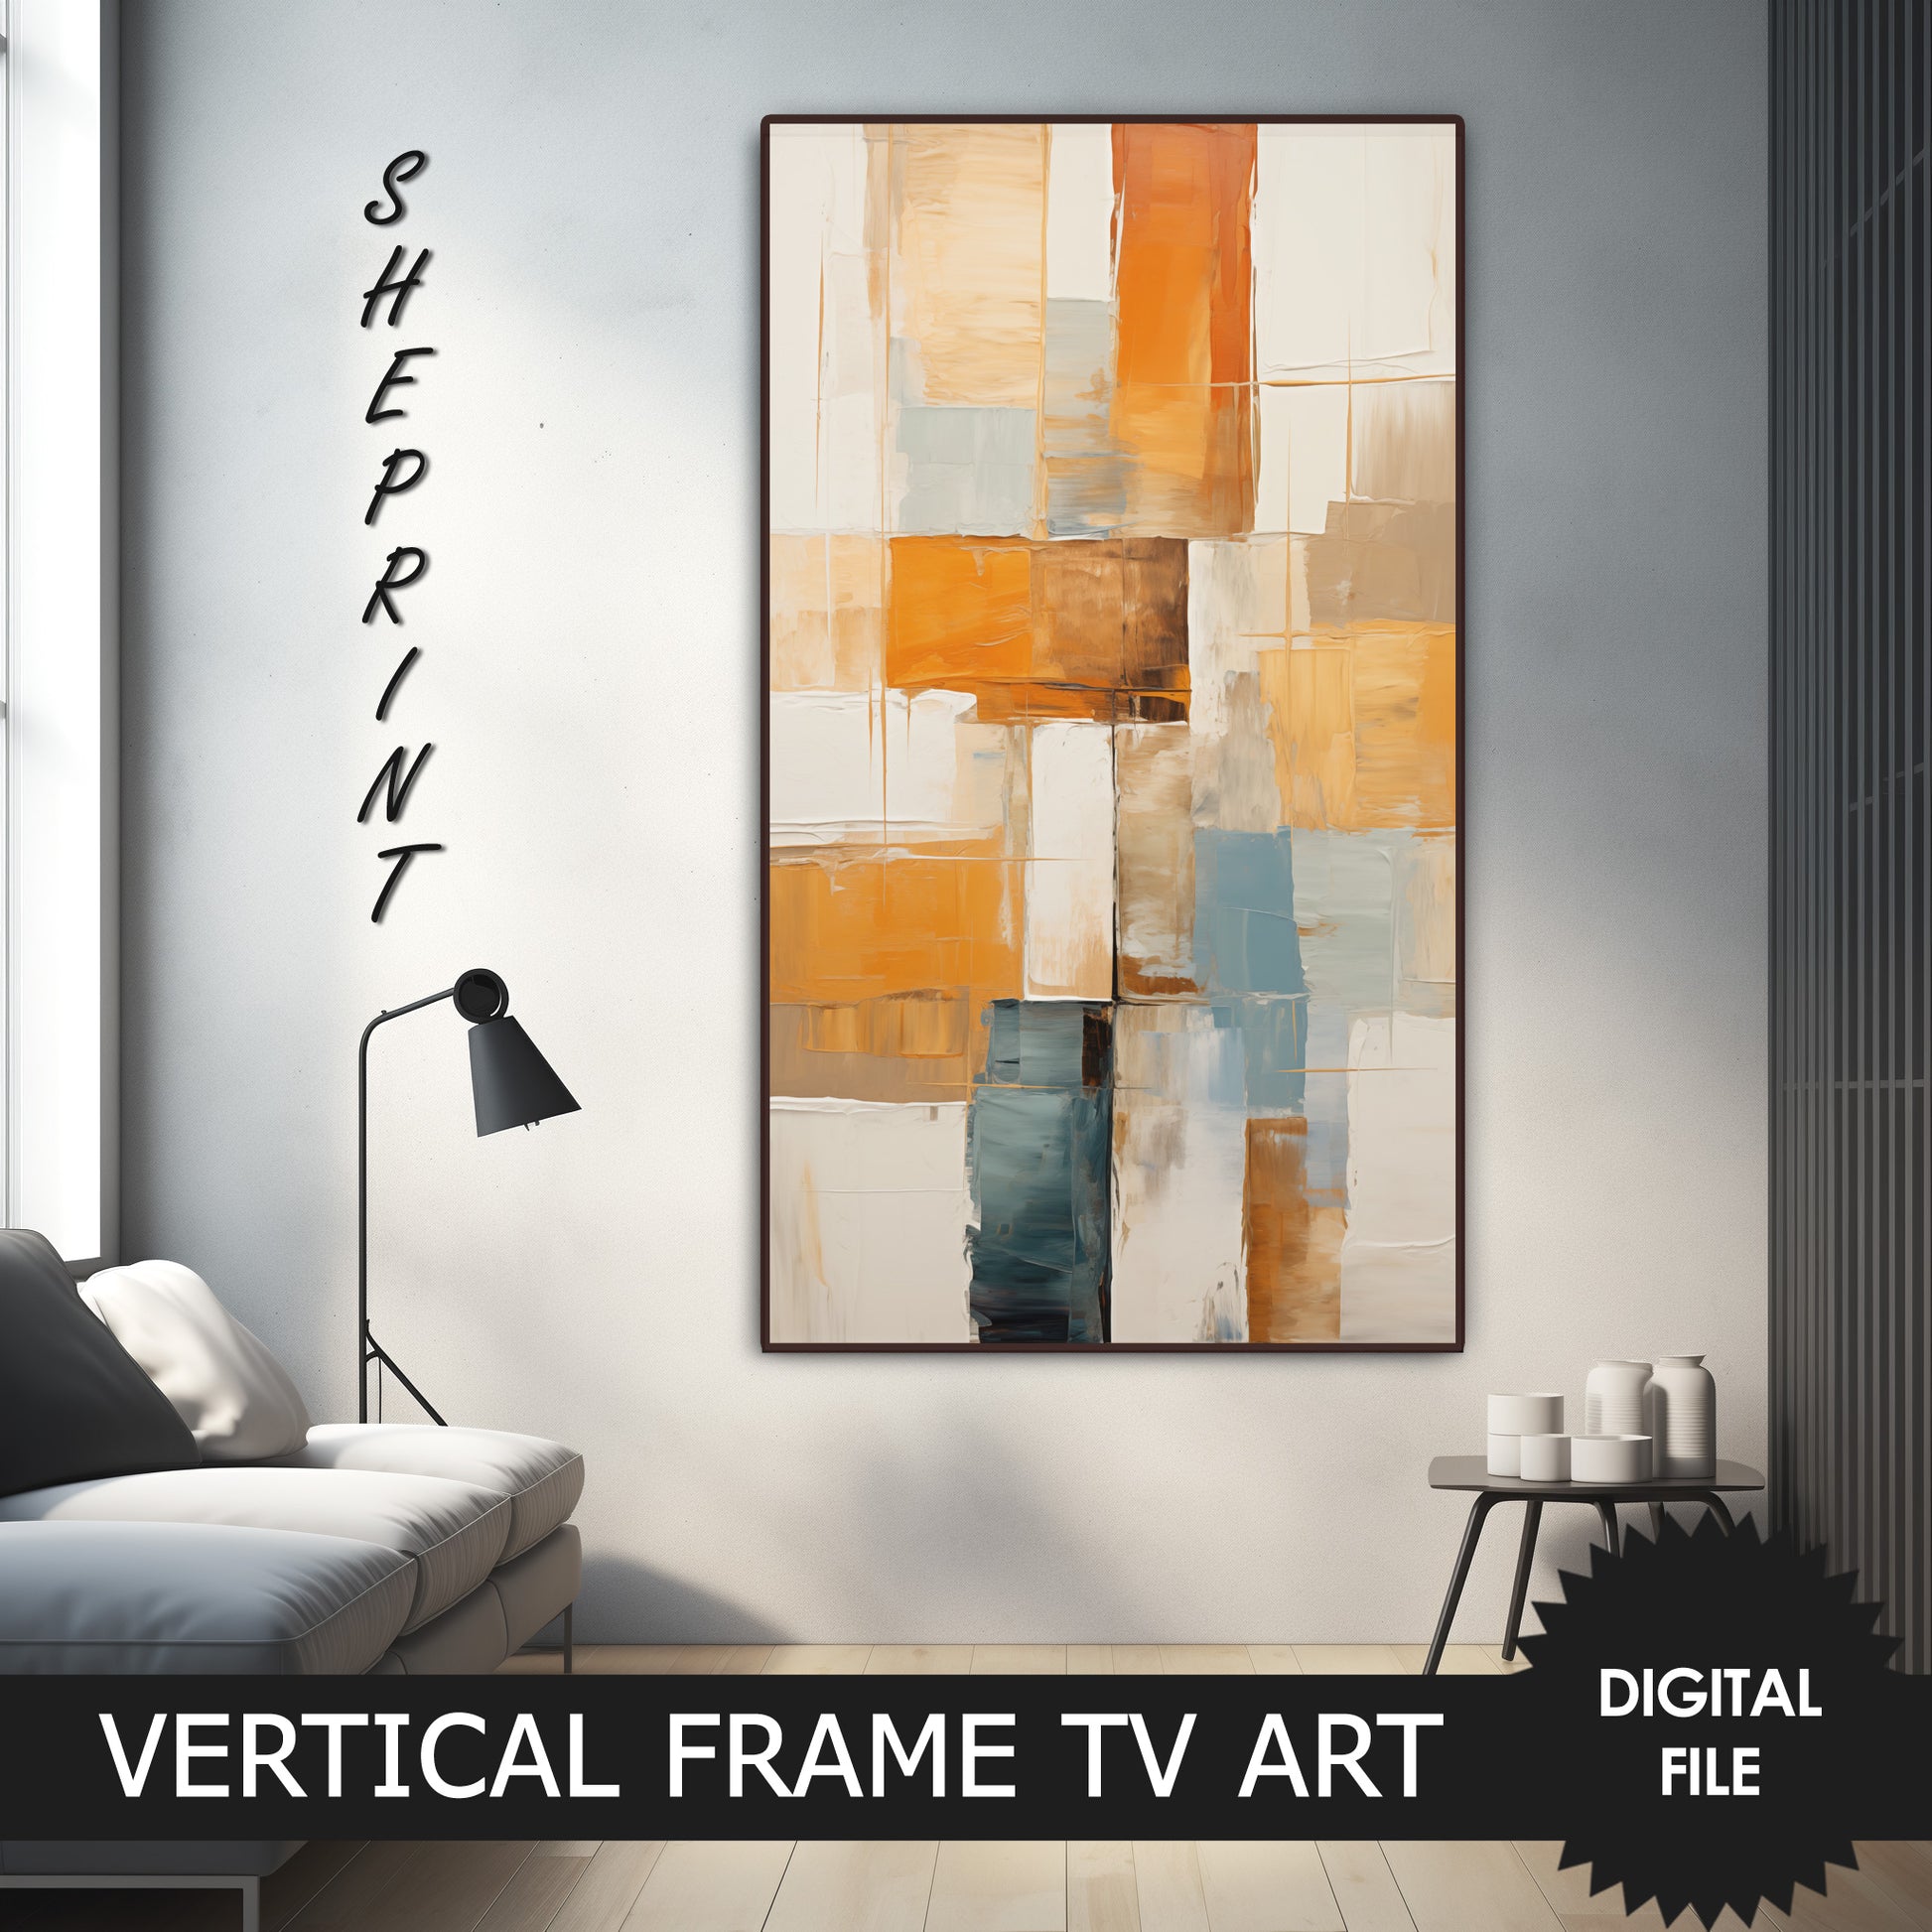 Vertical & Horizontal Frame TV Art. Preview image on Samsung Frame TV when mounted vertically